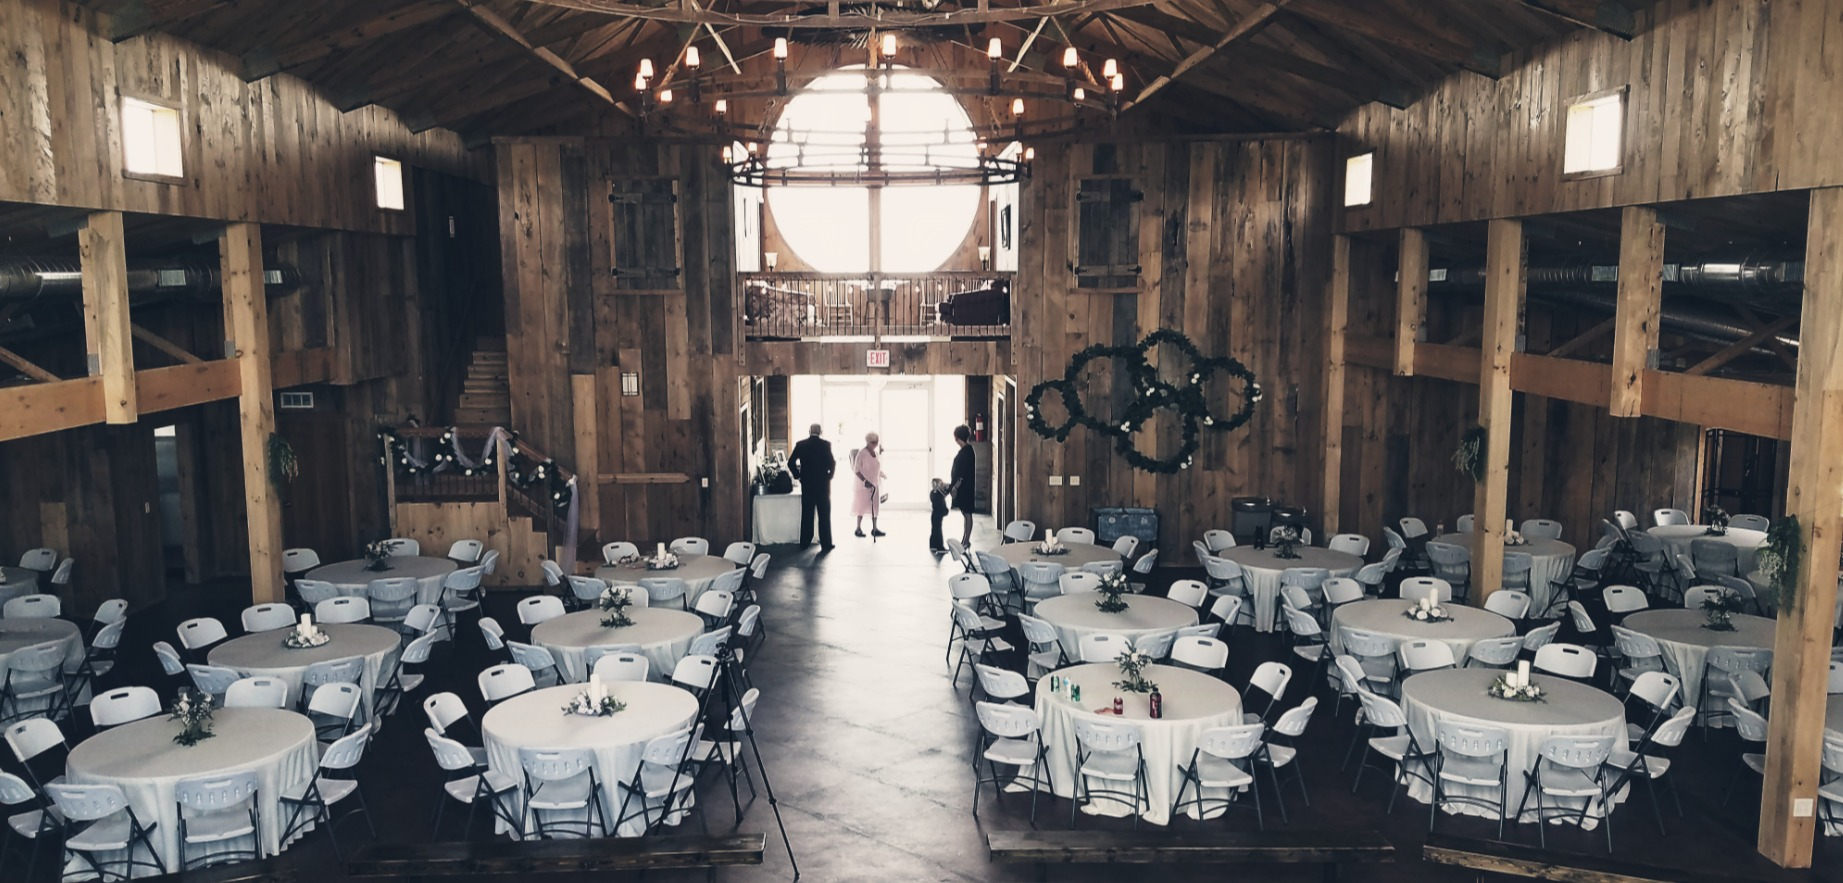 Three Sisters Barn in Dallas Center, Iowa, is the quintessential wedding reception venue that promises to make your special day truly remarkable. This enchanting venue, nestled amidst Iowa's scenic countryside, offers a captivating blend of rustic charm and modern sophistication. With its weathered wood accents, spacious interiors, and delightful ambiance, Three Sisters Barn provides an idyllic setting for hosting your dream wedding reception. Whether you're planning an intimate gathering or a lavish celebration, this venue's adaptable spaces can be tailored to suit your individual style and needs. At Three Sisters Barn, your wedding reception will be bathed in warmth and elegance, creating lasting memories for you and your guests in a picturesque countryside setting.